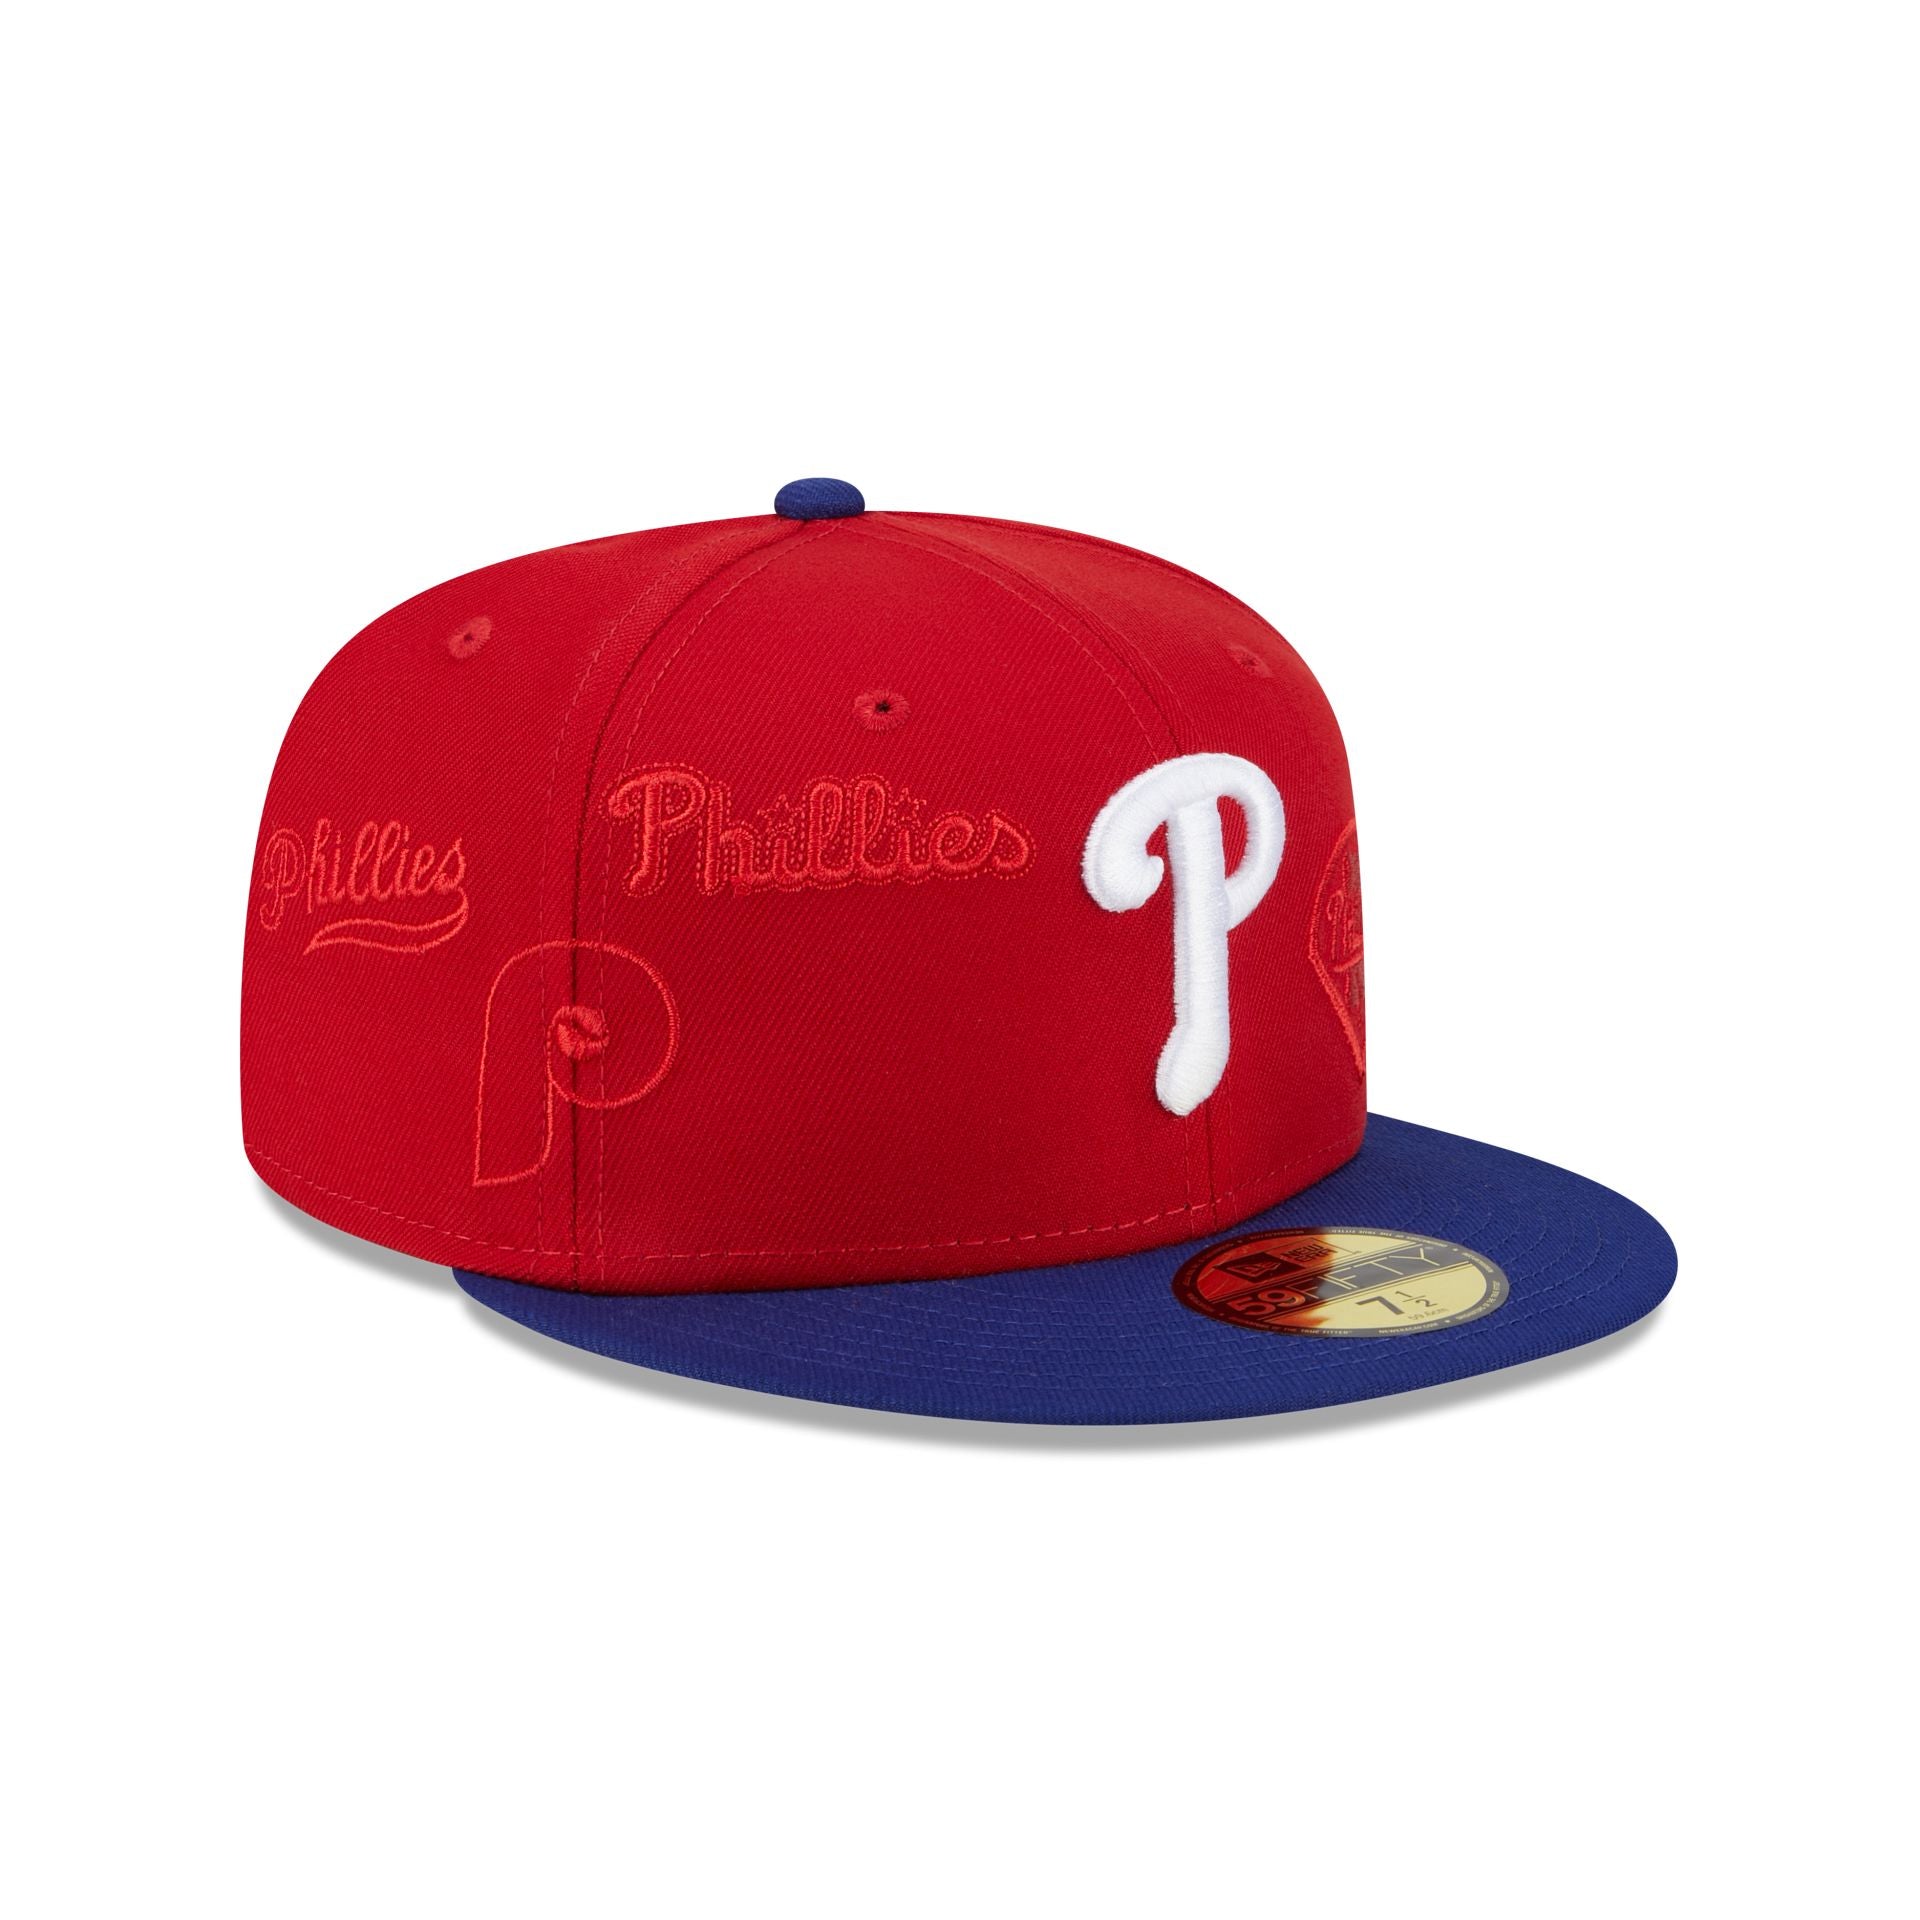 Men’s Philadelphia Phillies Red City Patch 59FIFTY Fitted Hats